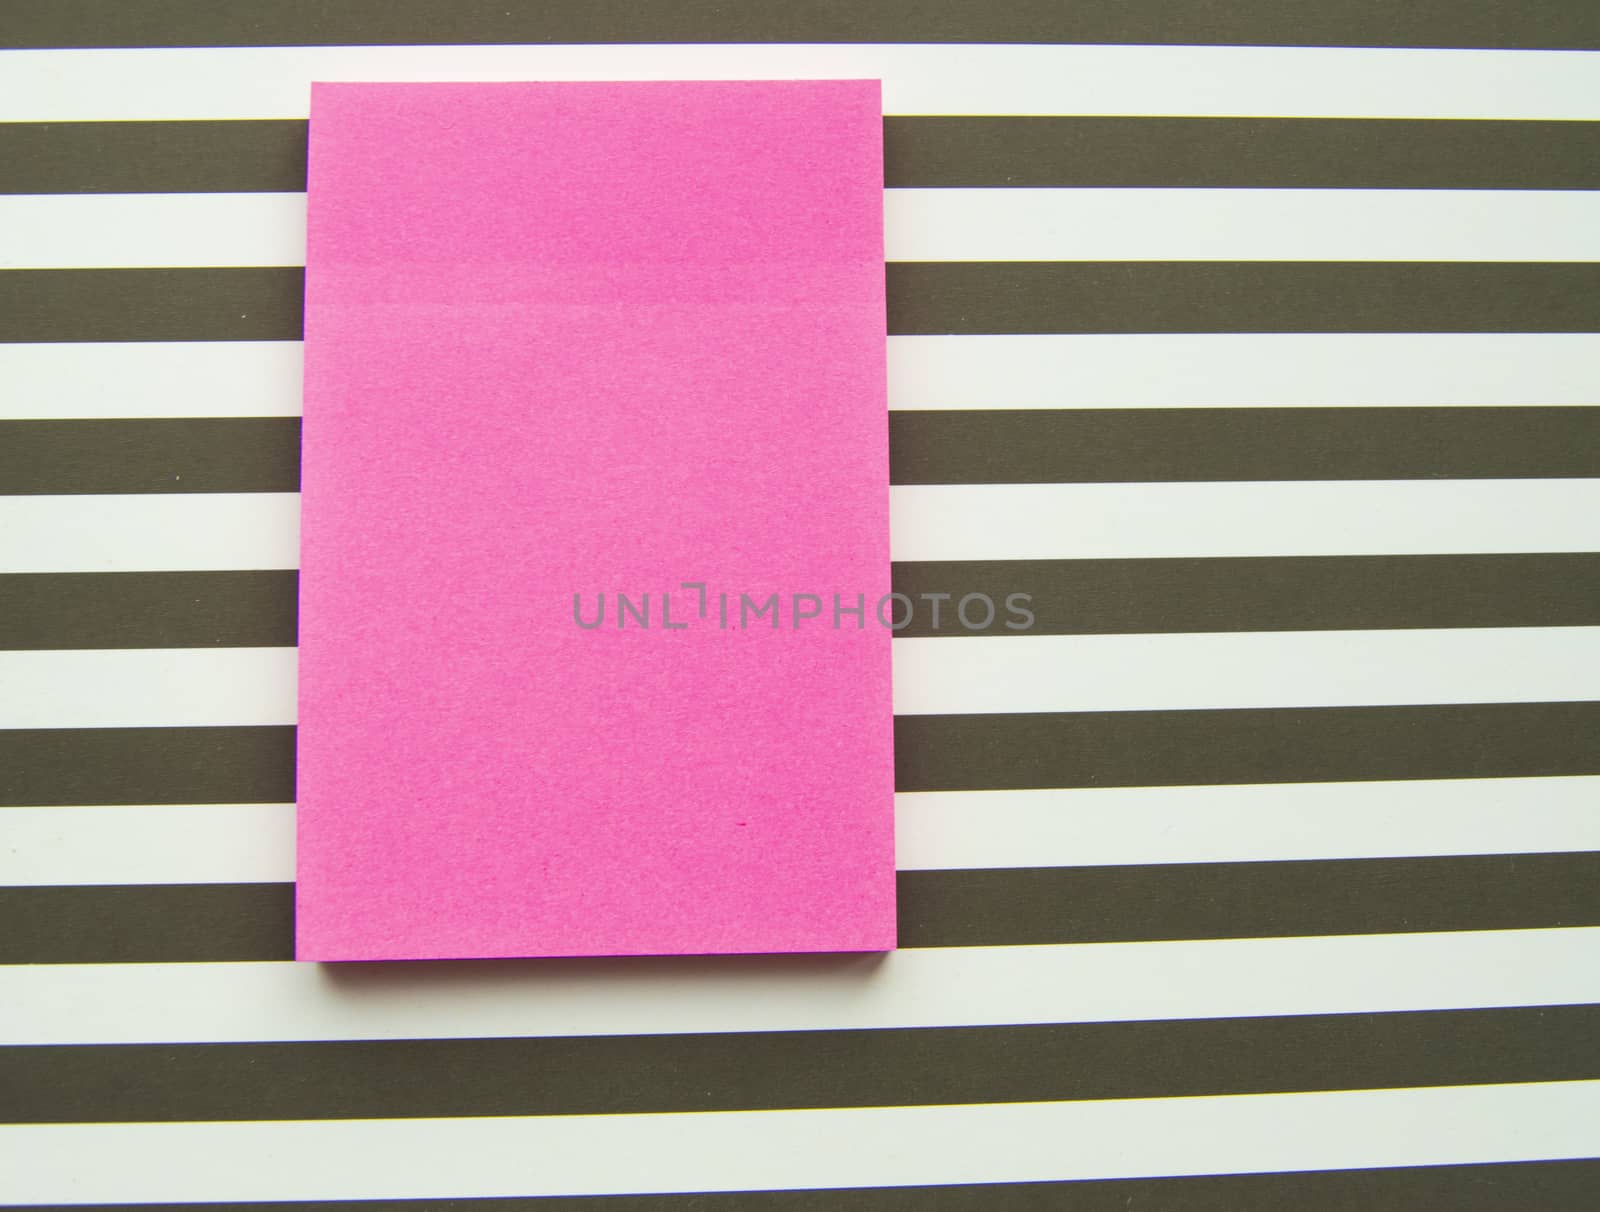 Red message sticker on black and white striped background, business objects by claire_lucia